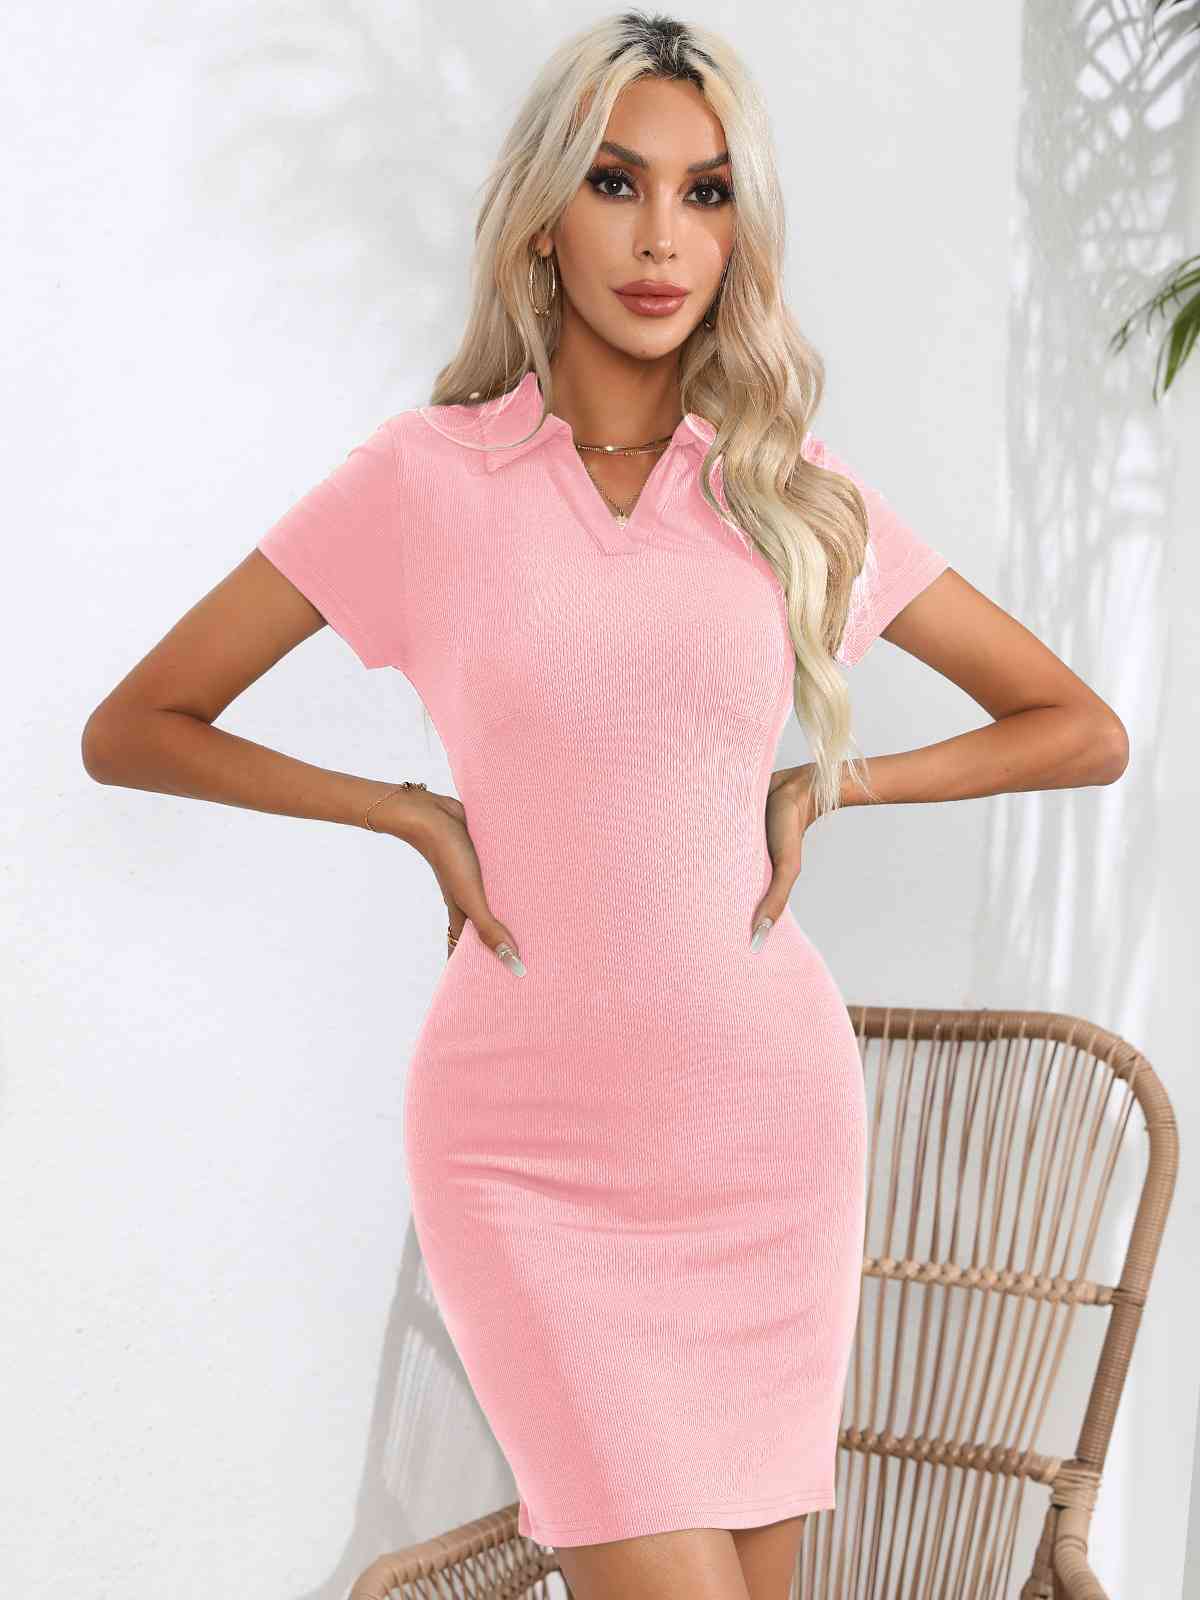 Johnny Collar Short Sleeve Bodycon Dress in 3 Color Choices in Size S, M, L, or XL